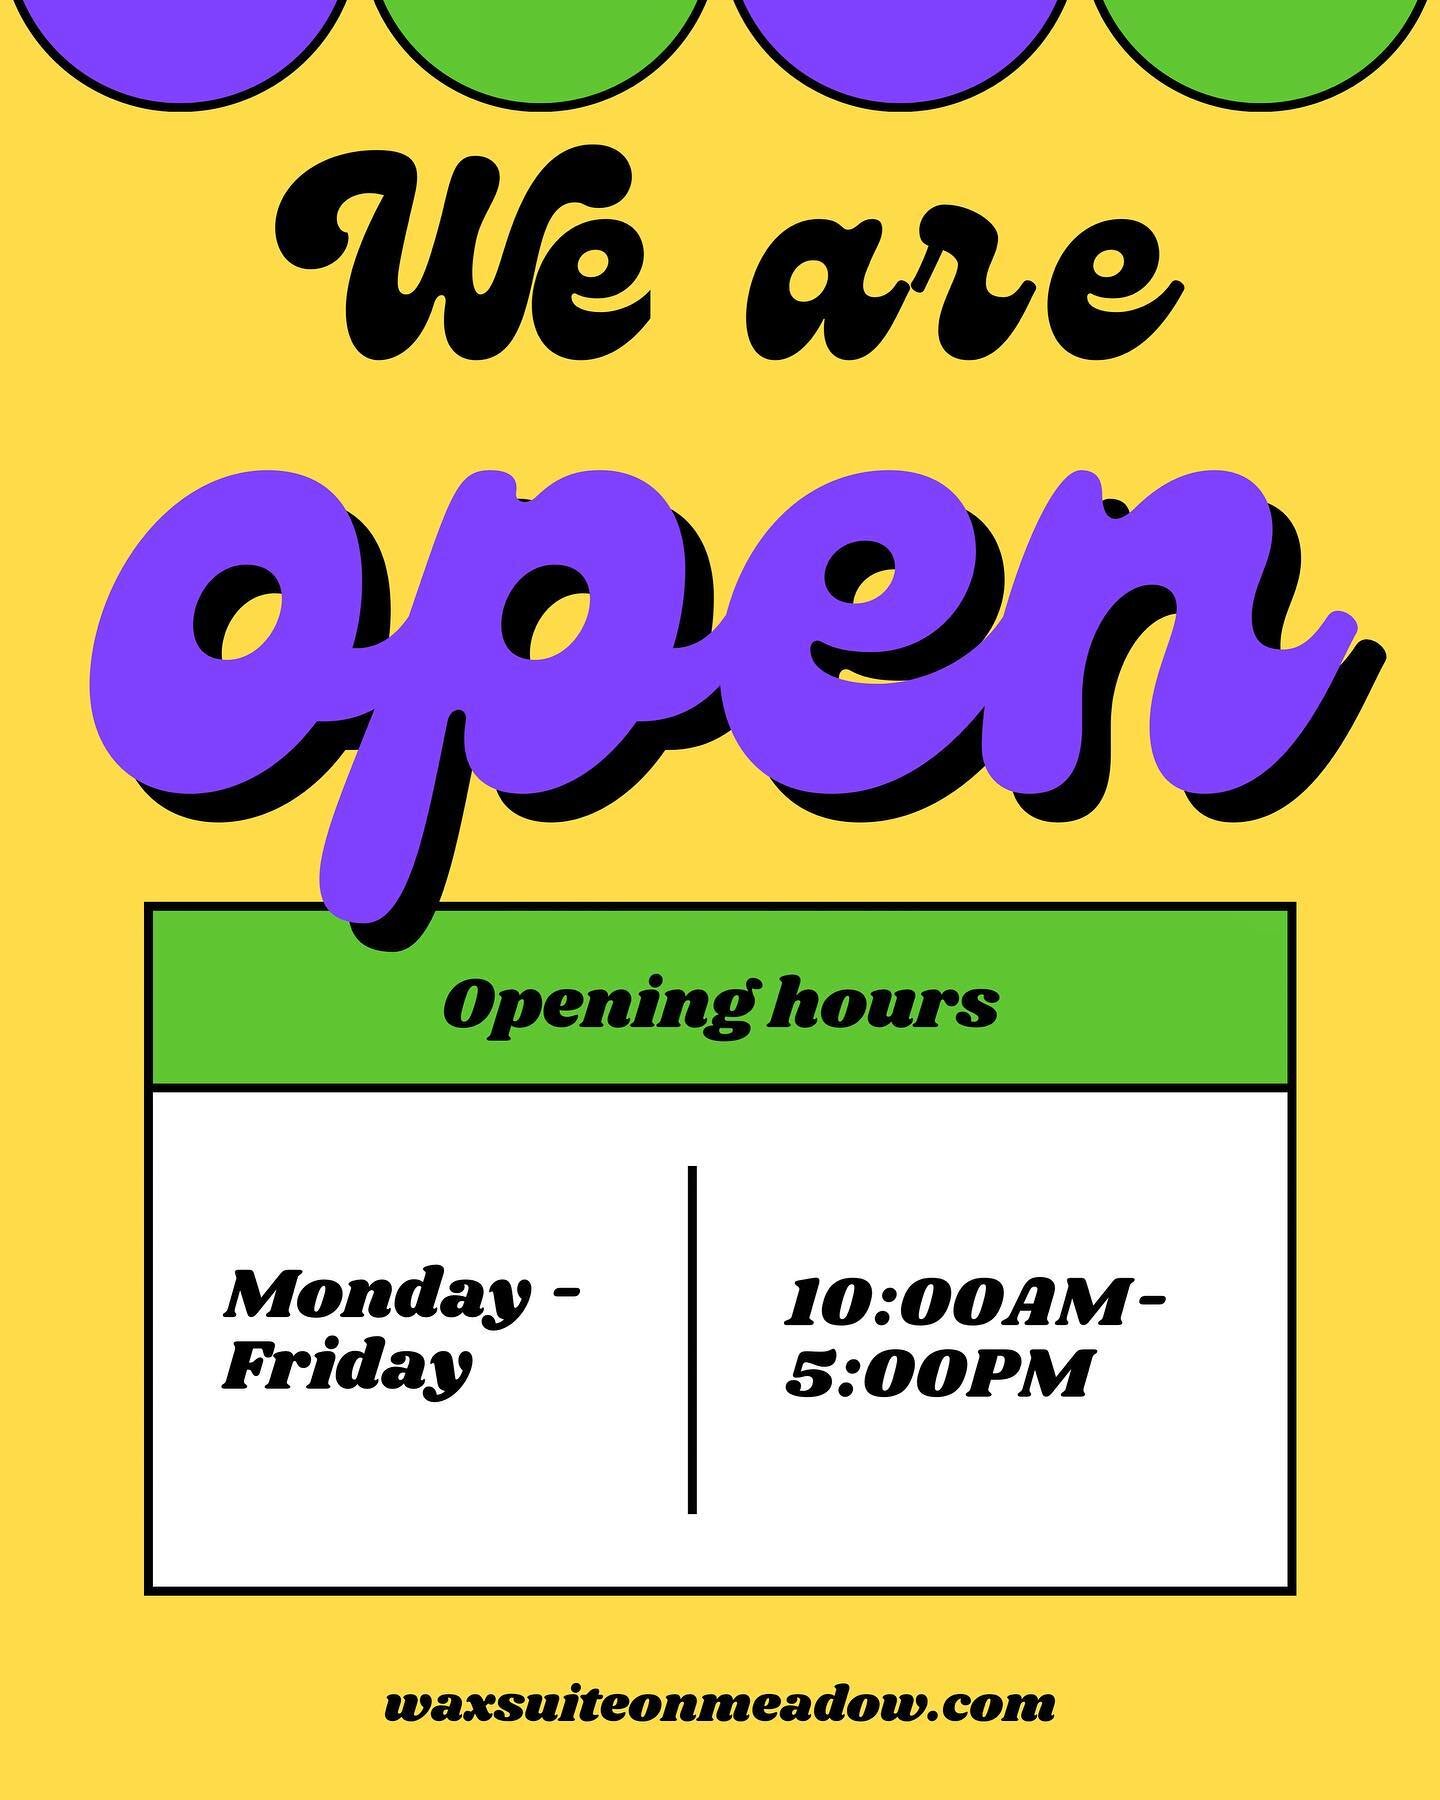 ✨temporary change to my hours of operation!

🧜🏻&zwj;♀️instead of 10-6 I will be open 10-5 Monday-Friday. This is only temporarily for 1-2 months until my husband can drive again! He recently broke his right leg 🙃

🧜🏻&zwj;♀️anyone on the books af